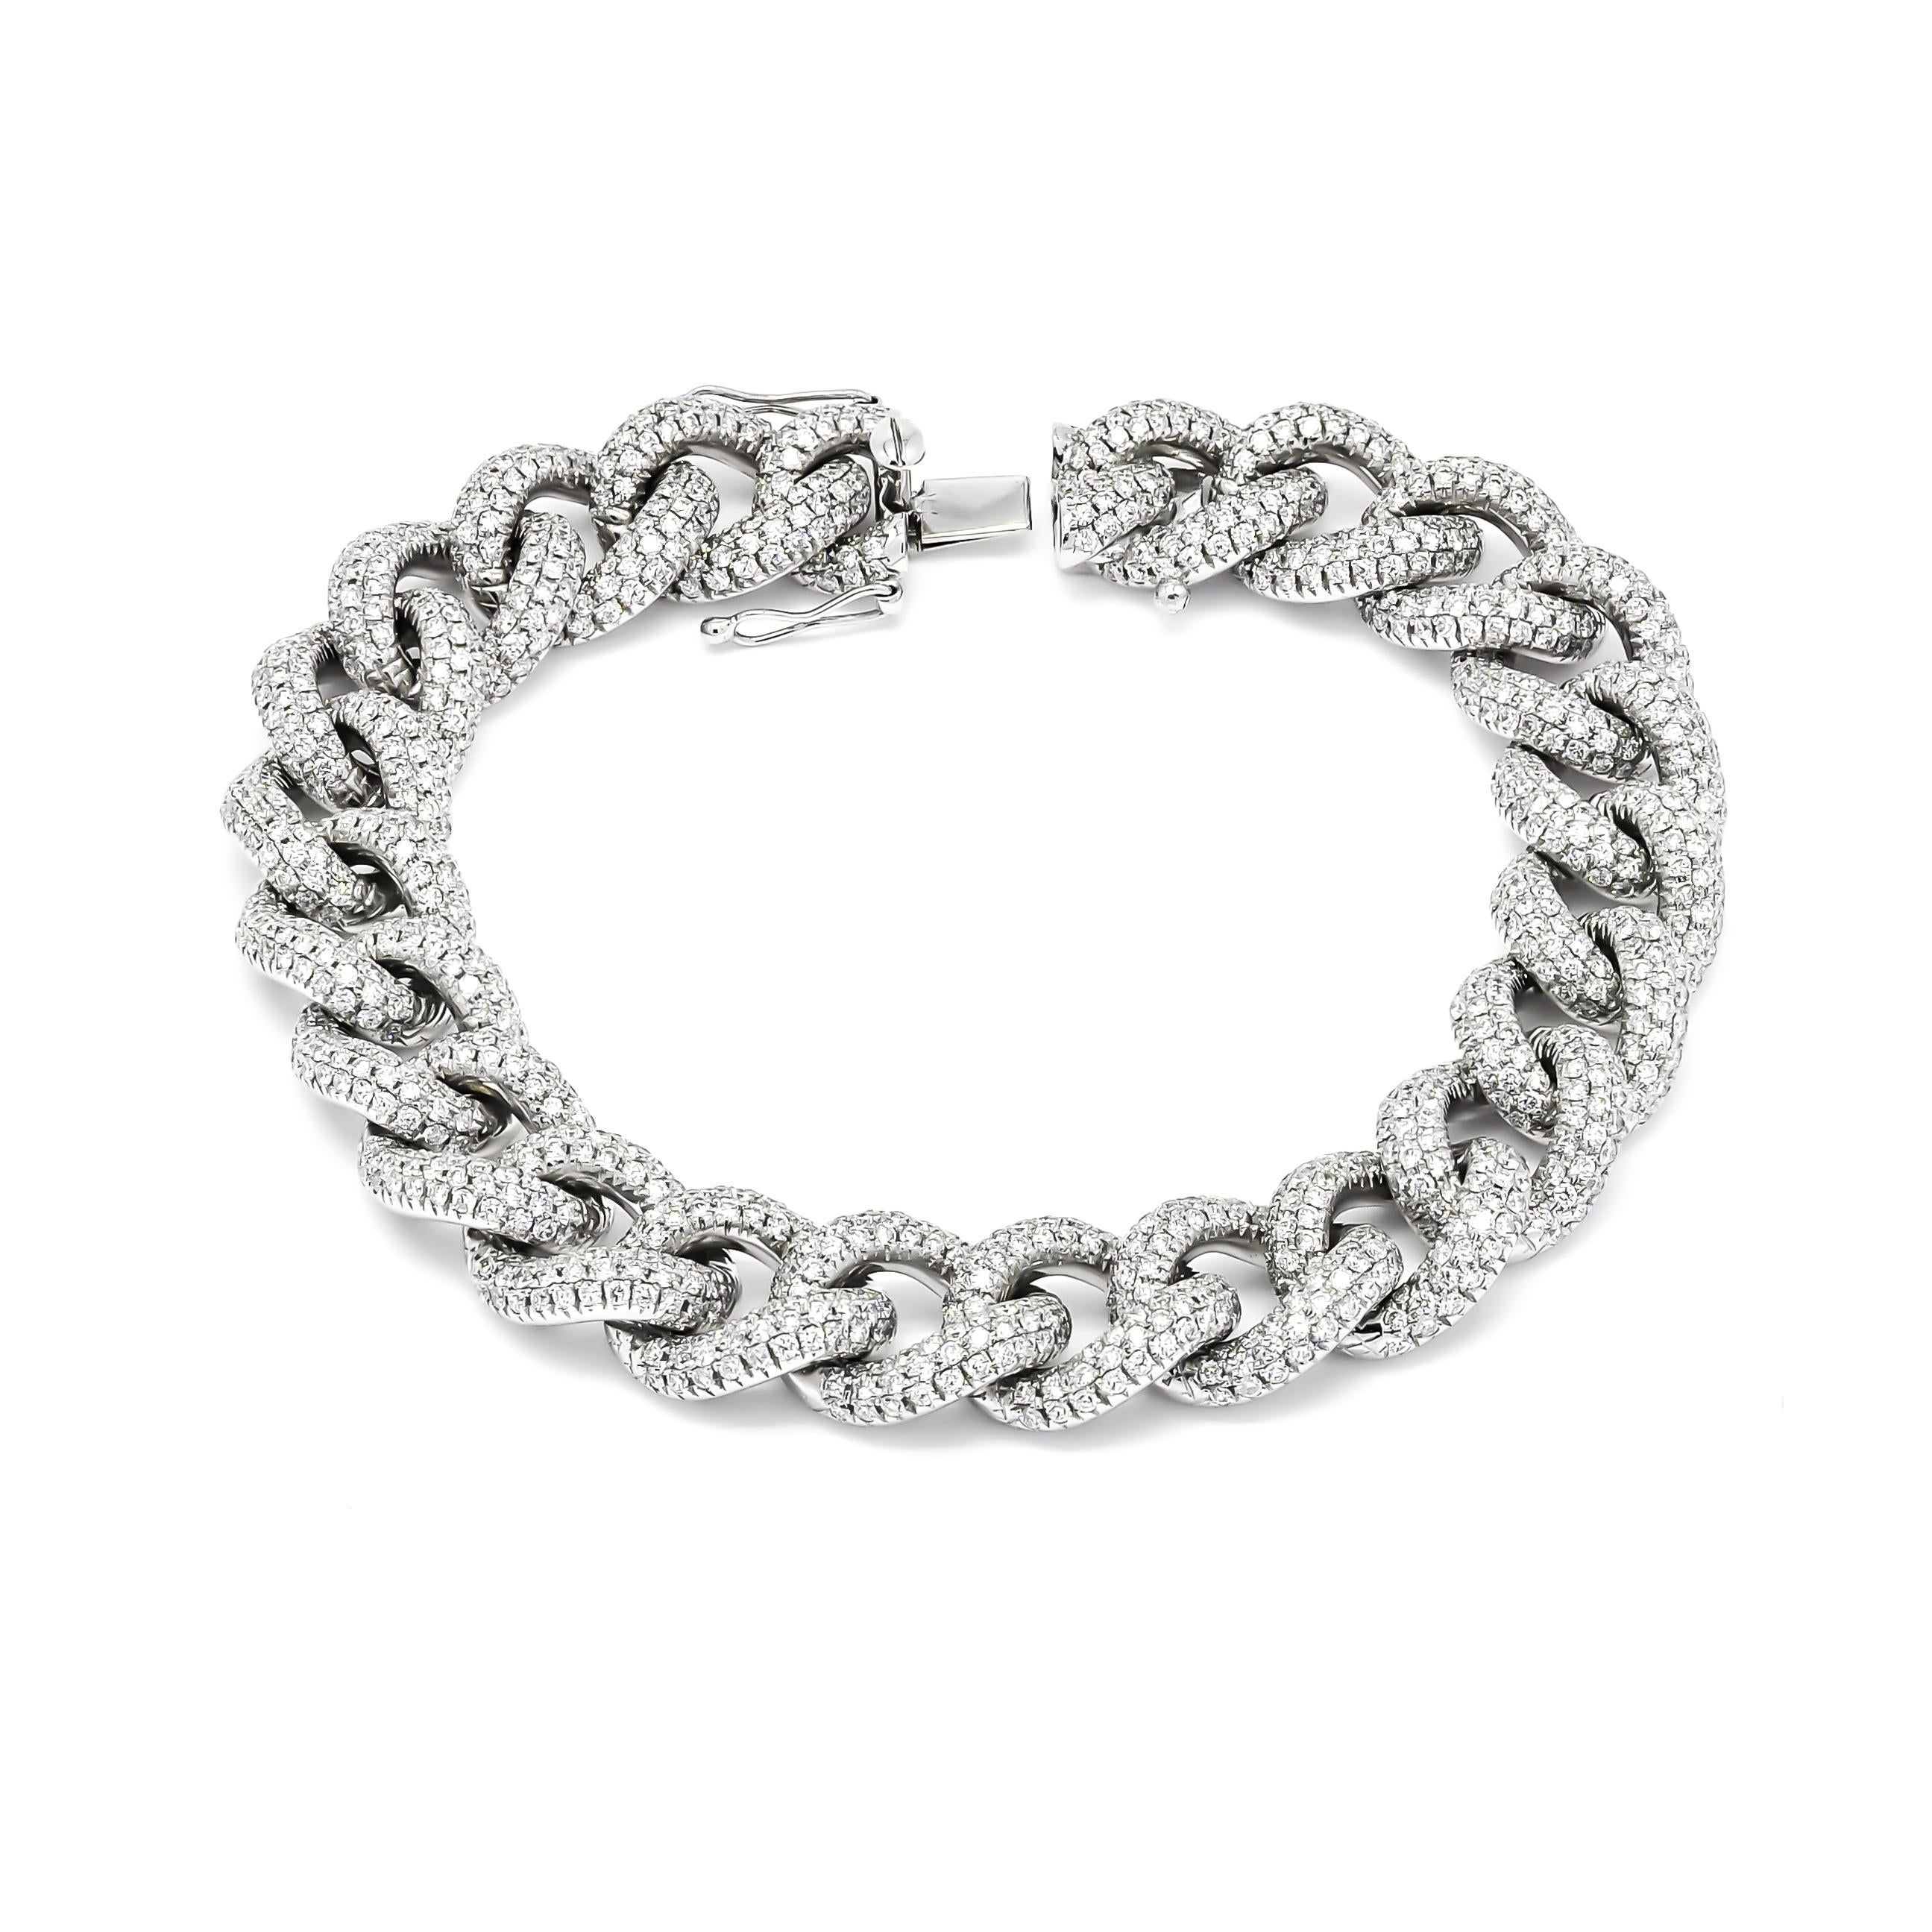 The jewelry dreams are made of a sparkling combination of modern glamour and chic design. 

Be bold and daring in this striking diamond wide curb link chain bracelet.

Shimmering links accented with round-shape diamonds add powerful shine to this